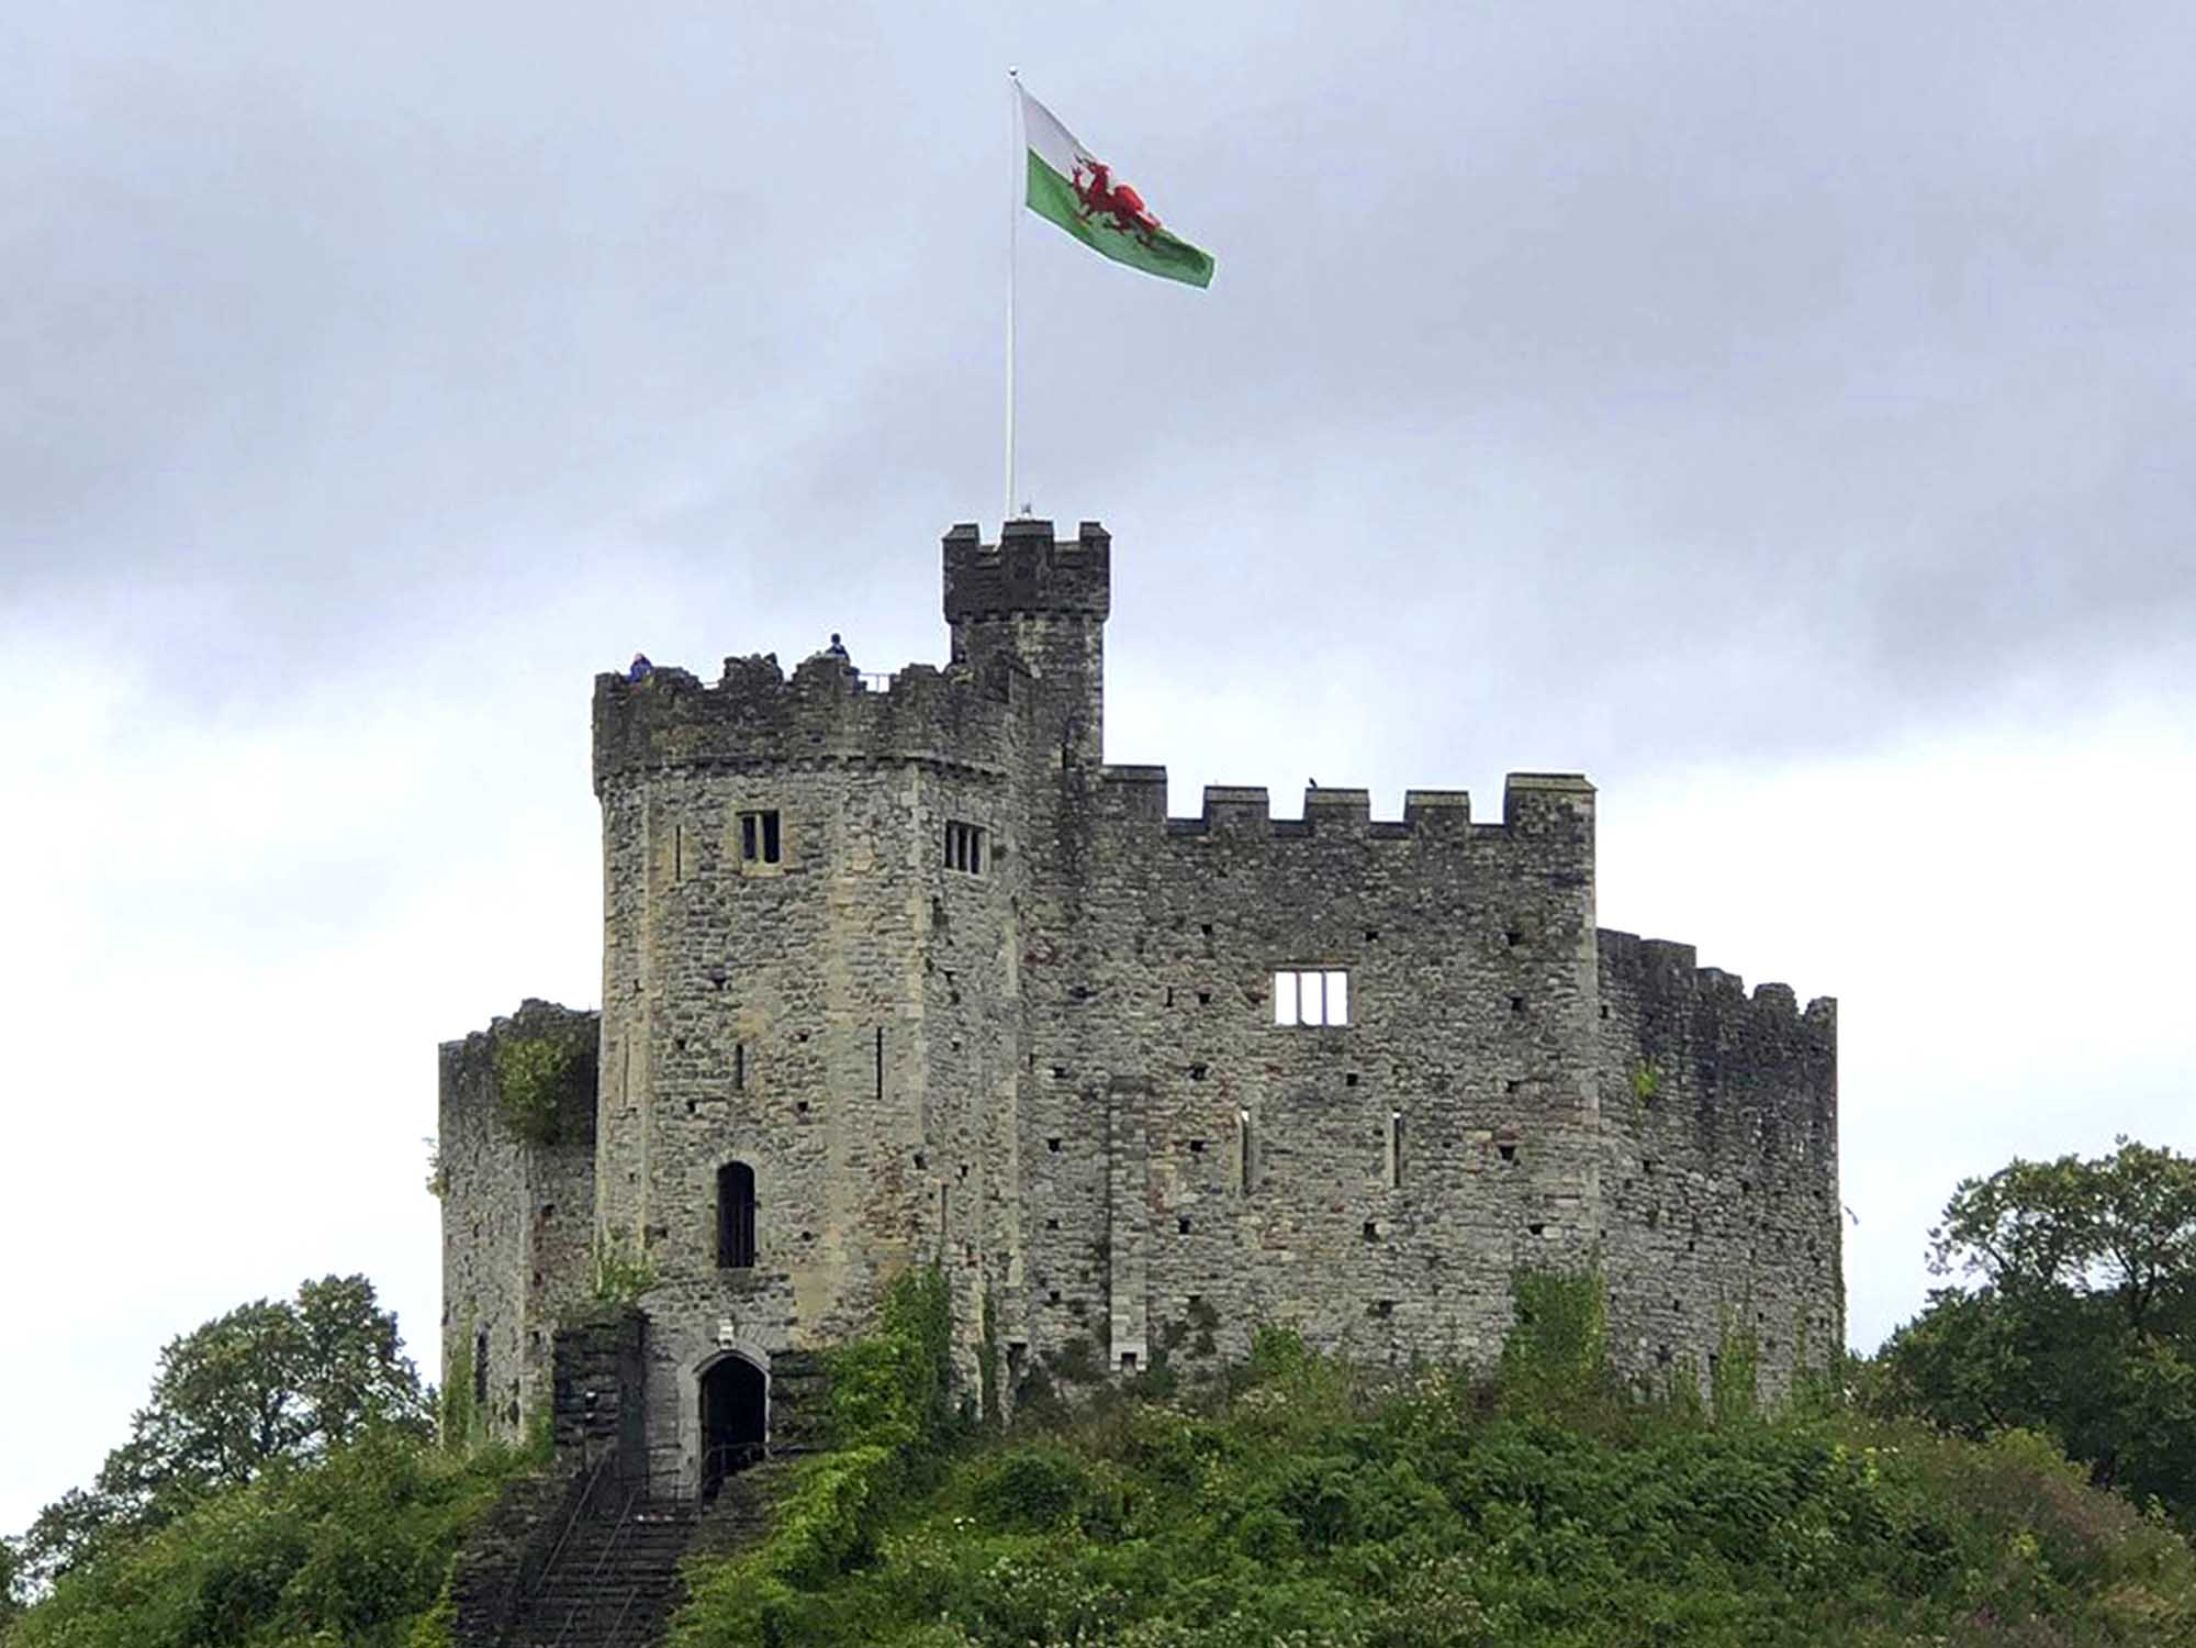 Things to do in Cardiff - Cardiff Castle